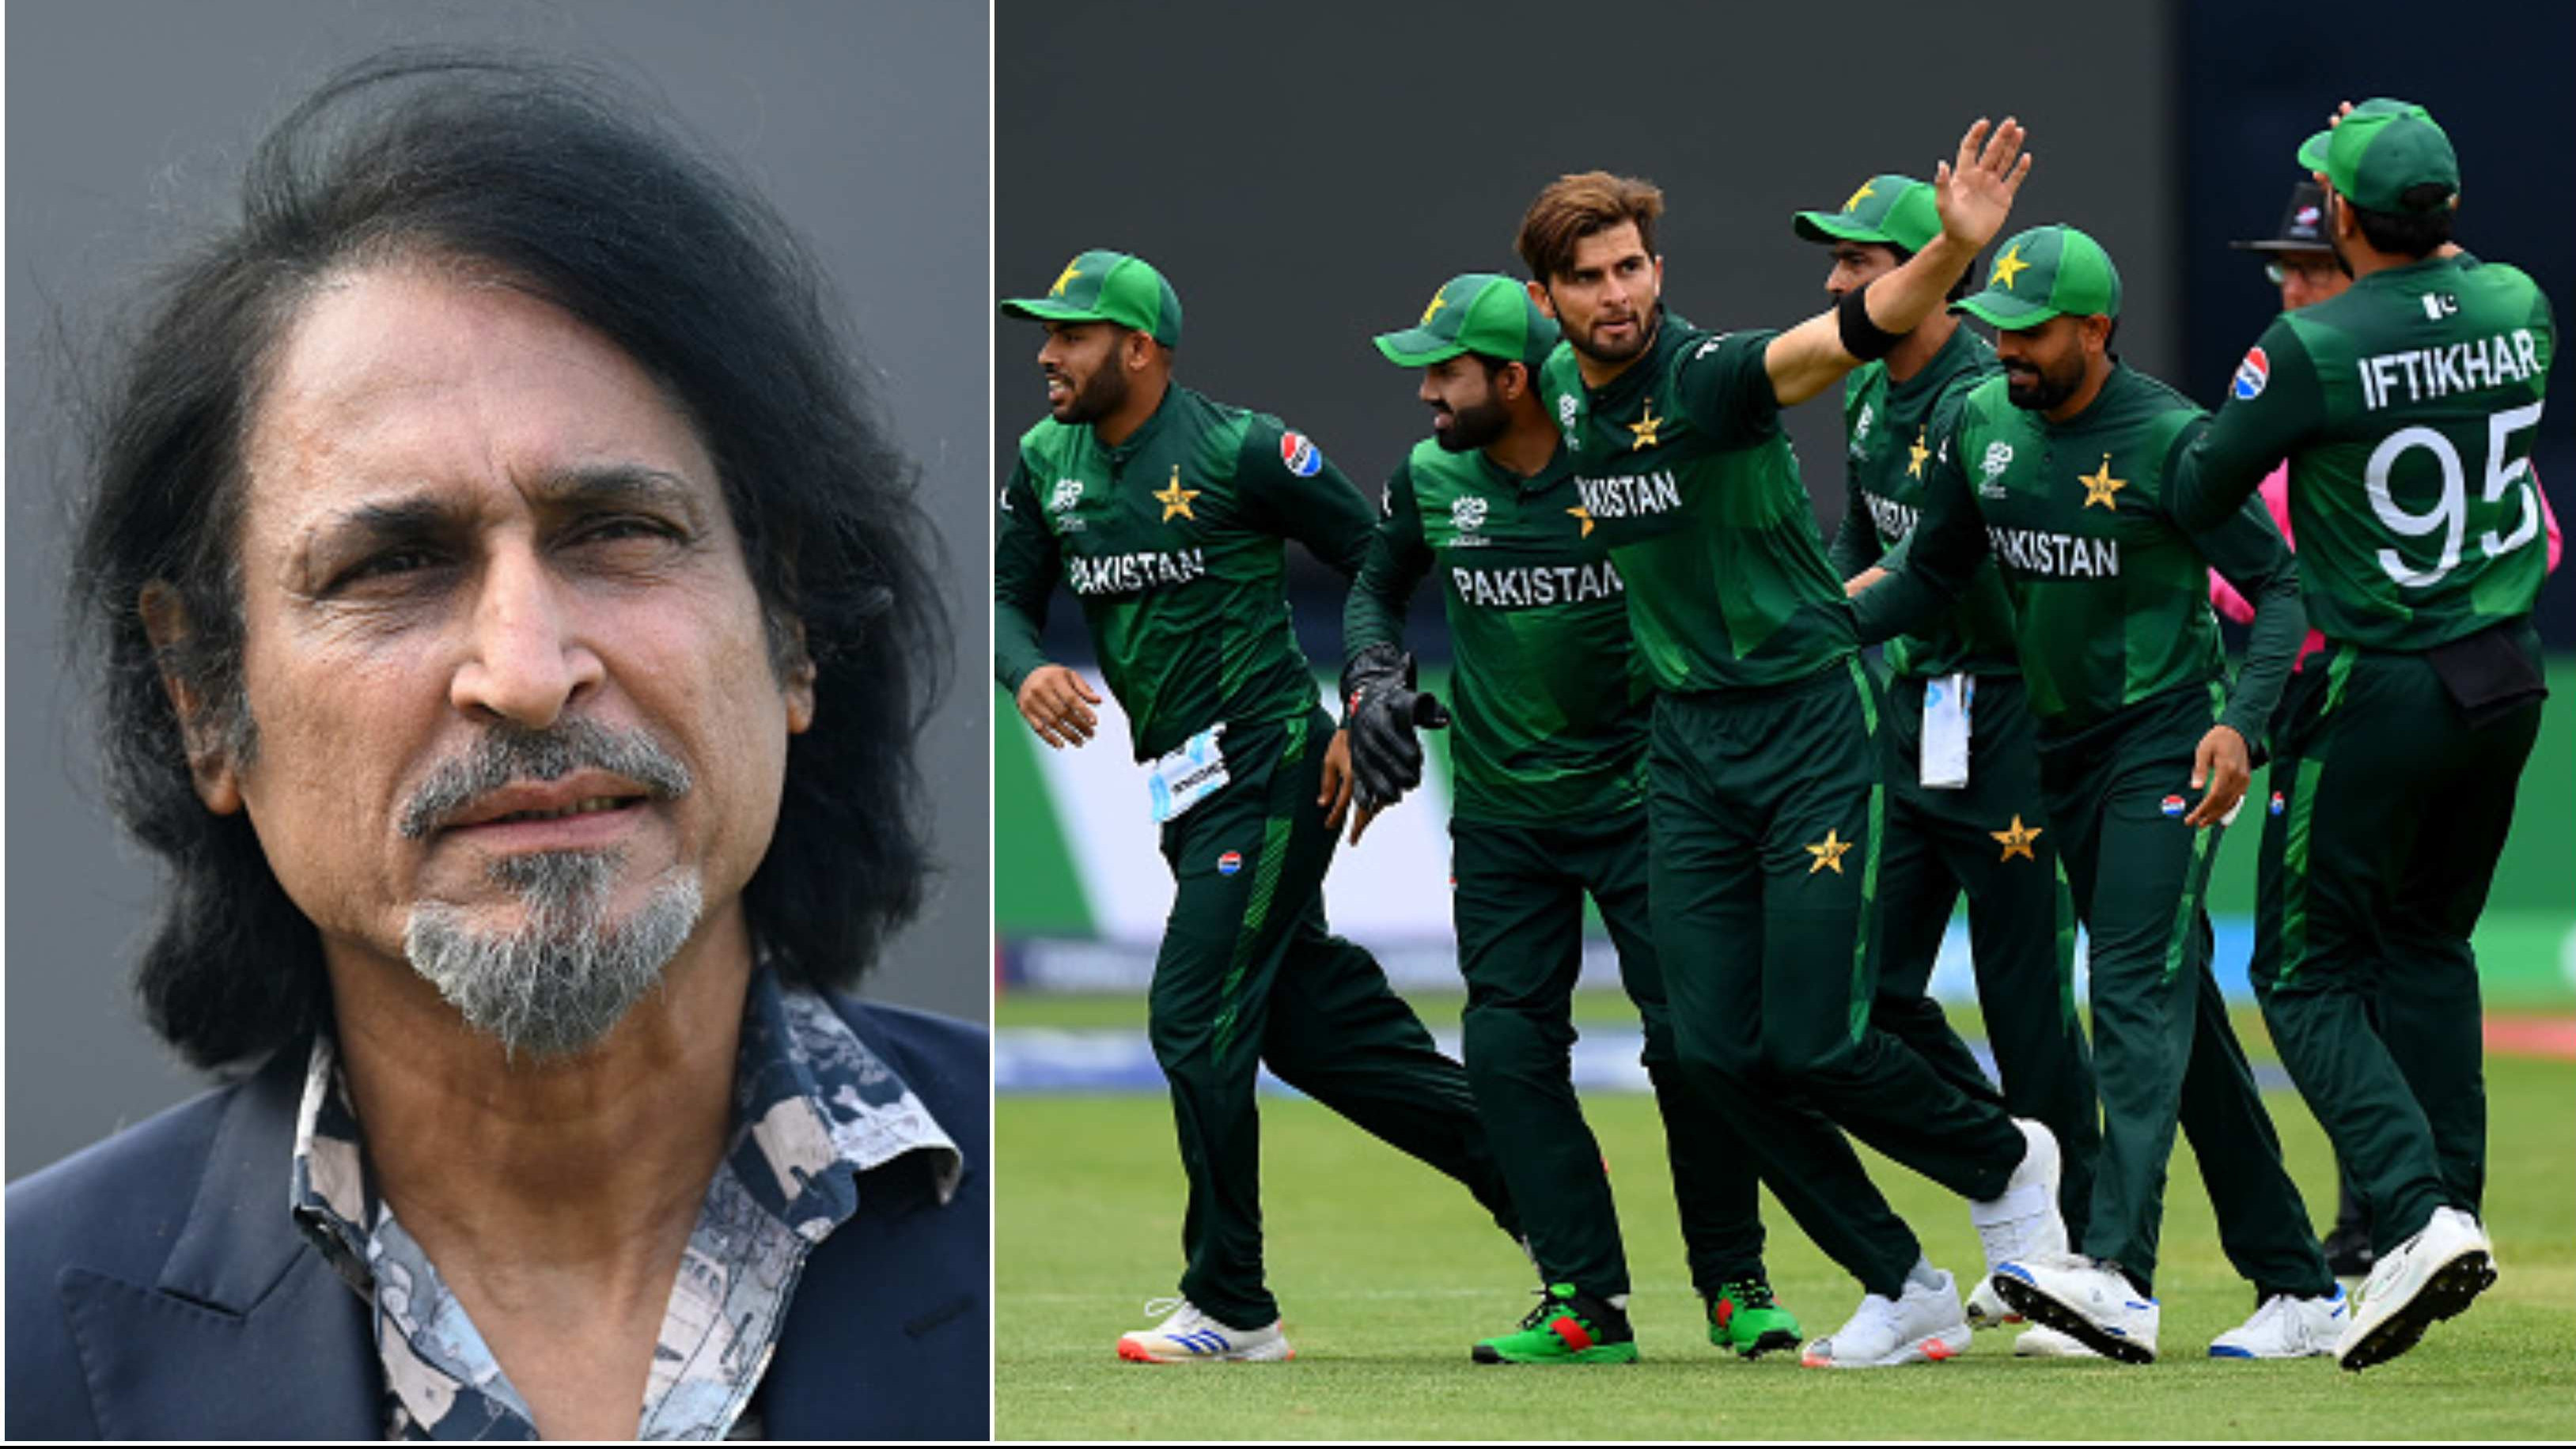 “They tend to freeze in a tense situation”: Ramiz Raja slams Babar Azam’s men for losing to India while chasing 119